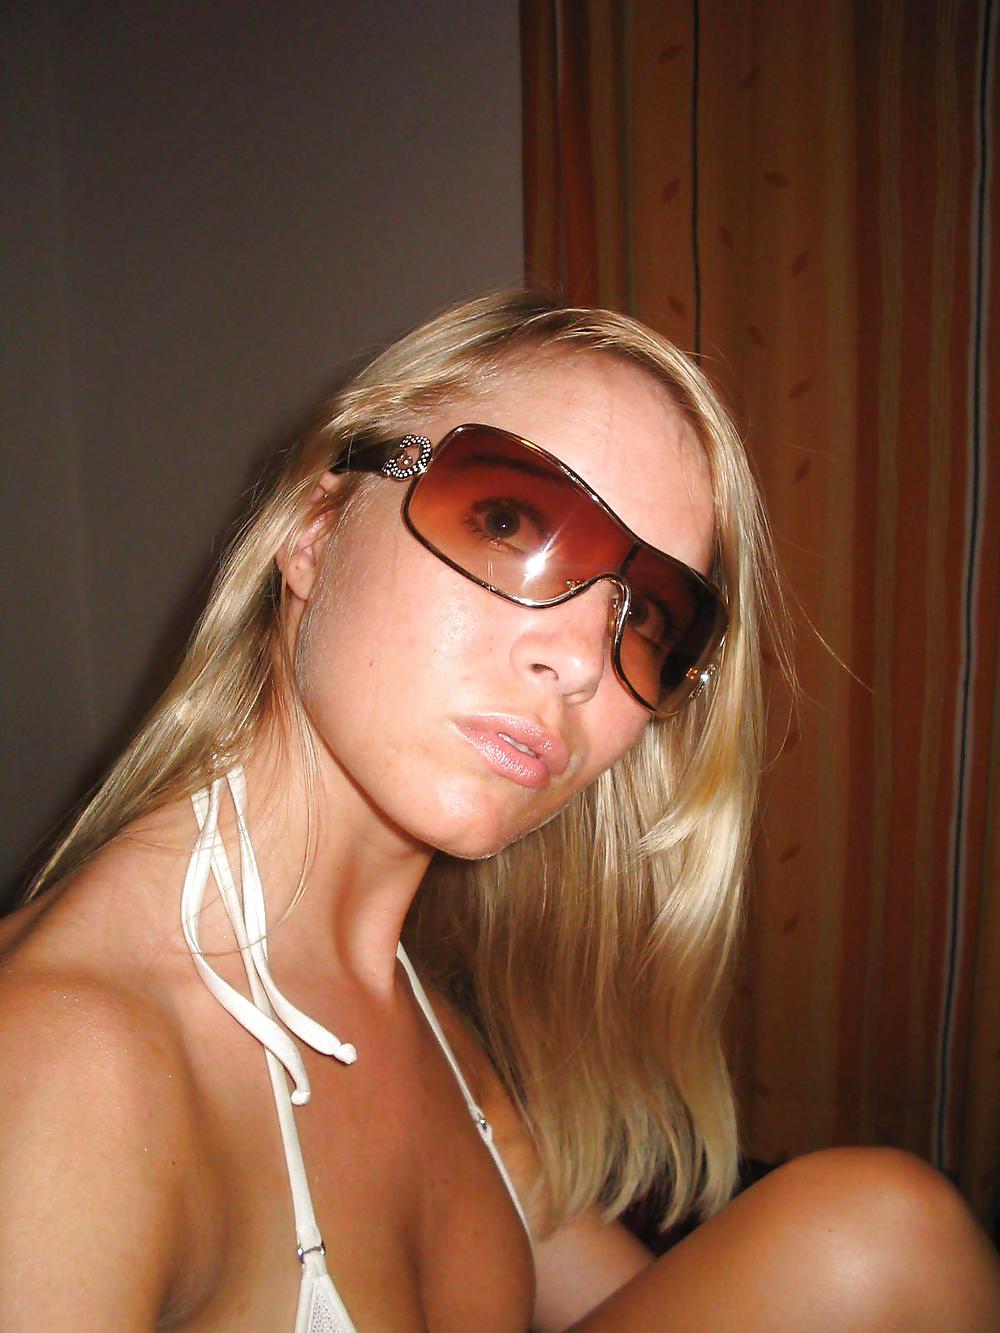 BLONDIE - BEAUTIFUL AND HORNY #8775362